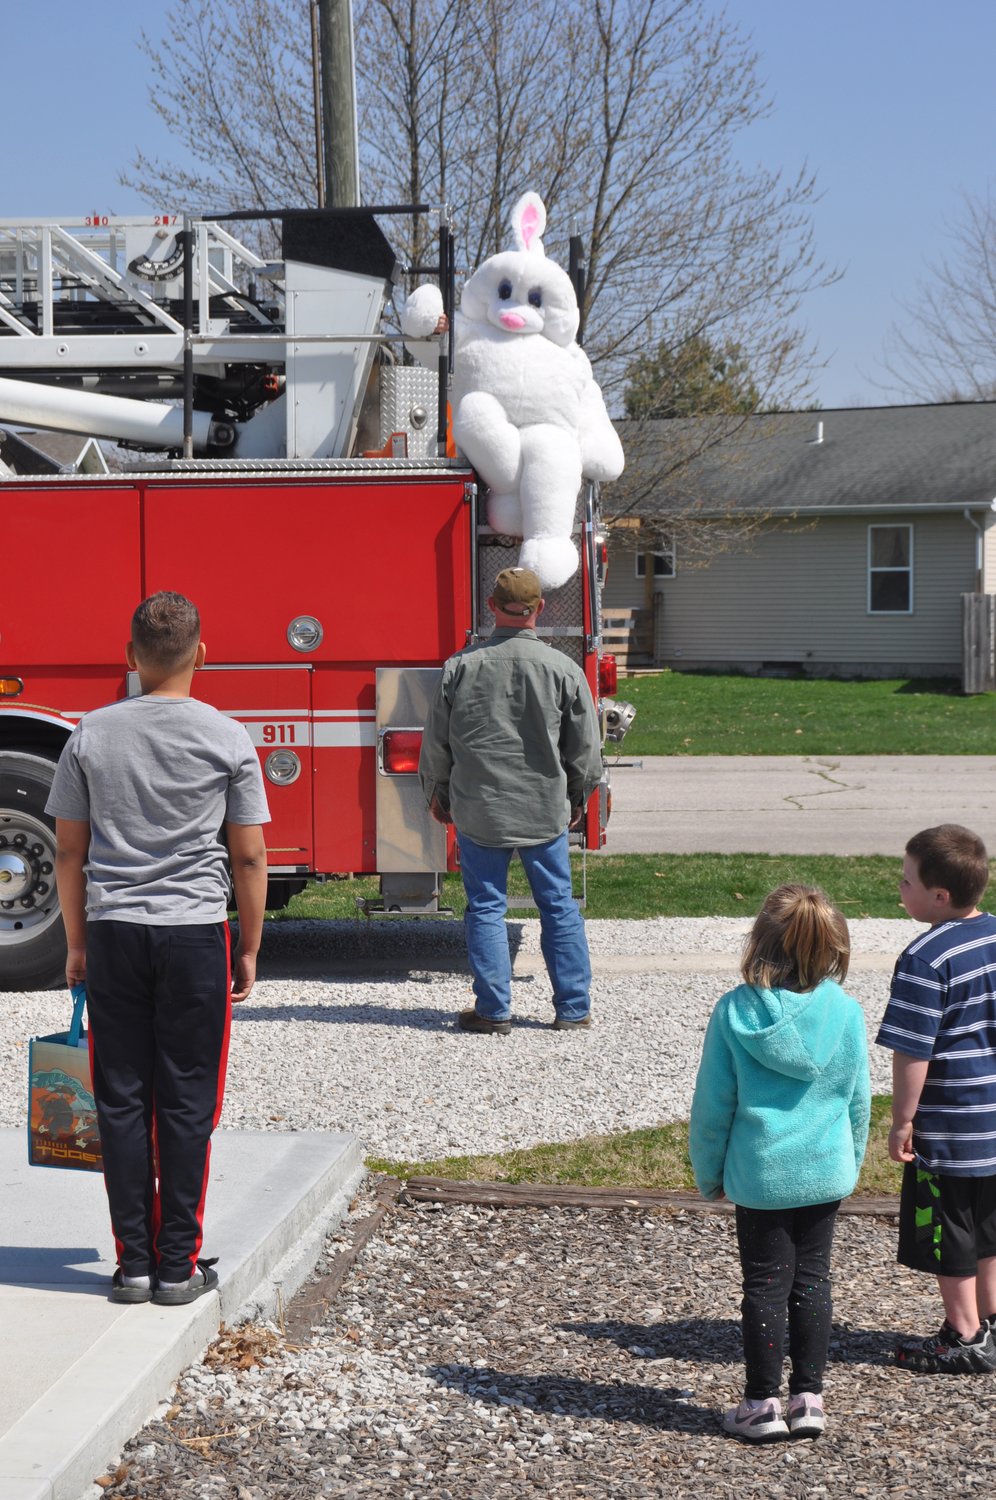 The Easter Bunny hops off a fire truck at the Easter egg hunt at Tremaine Park in Waynetown Saturday. The event was sponsored by the Waynetown Merchants Association.